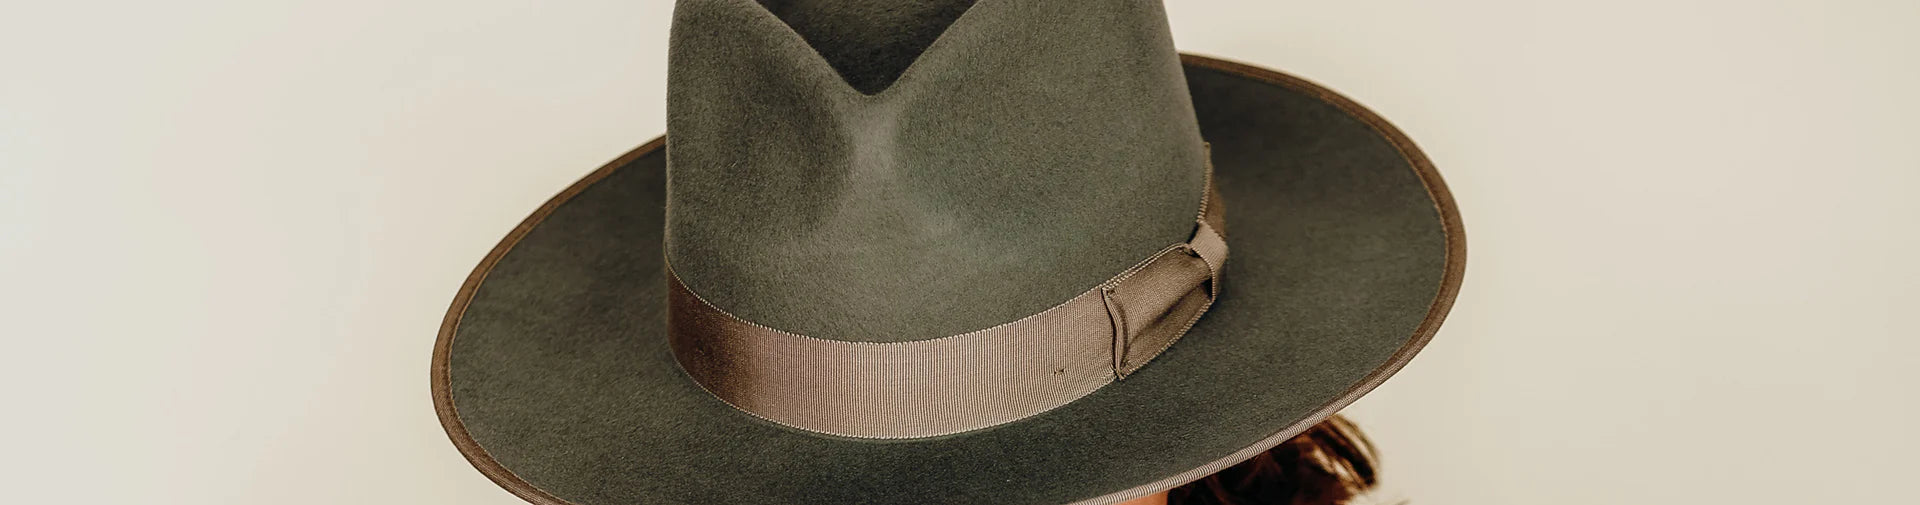 The Double Knot Hat Bands - Brown and Black